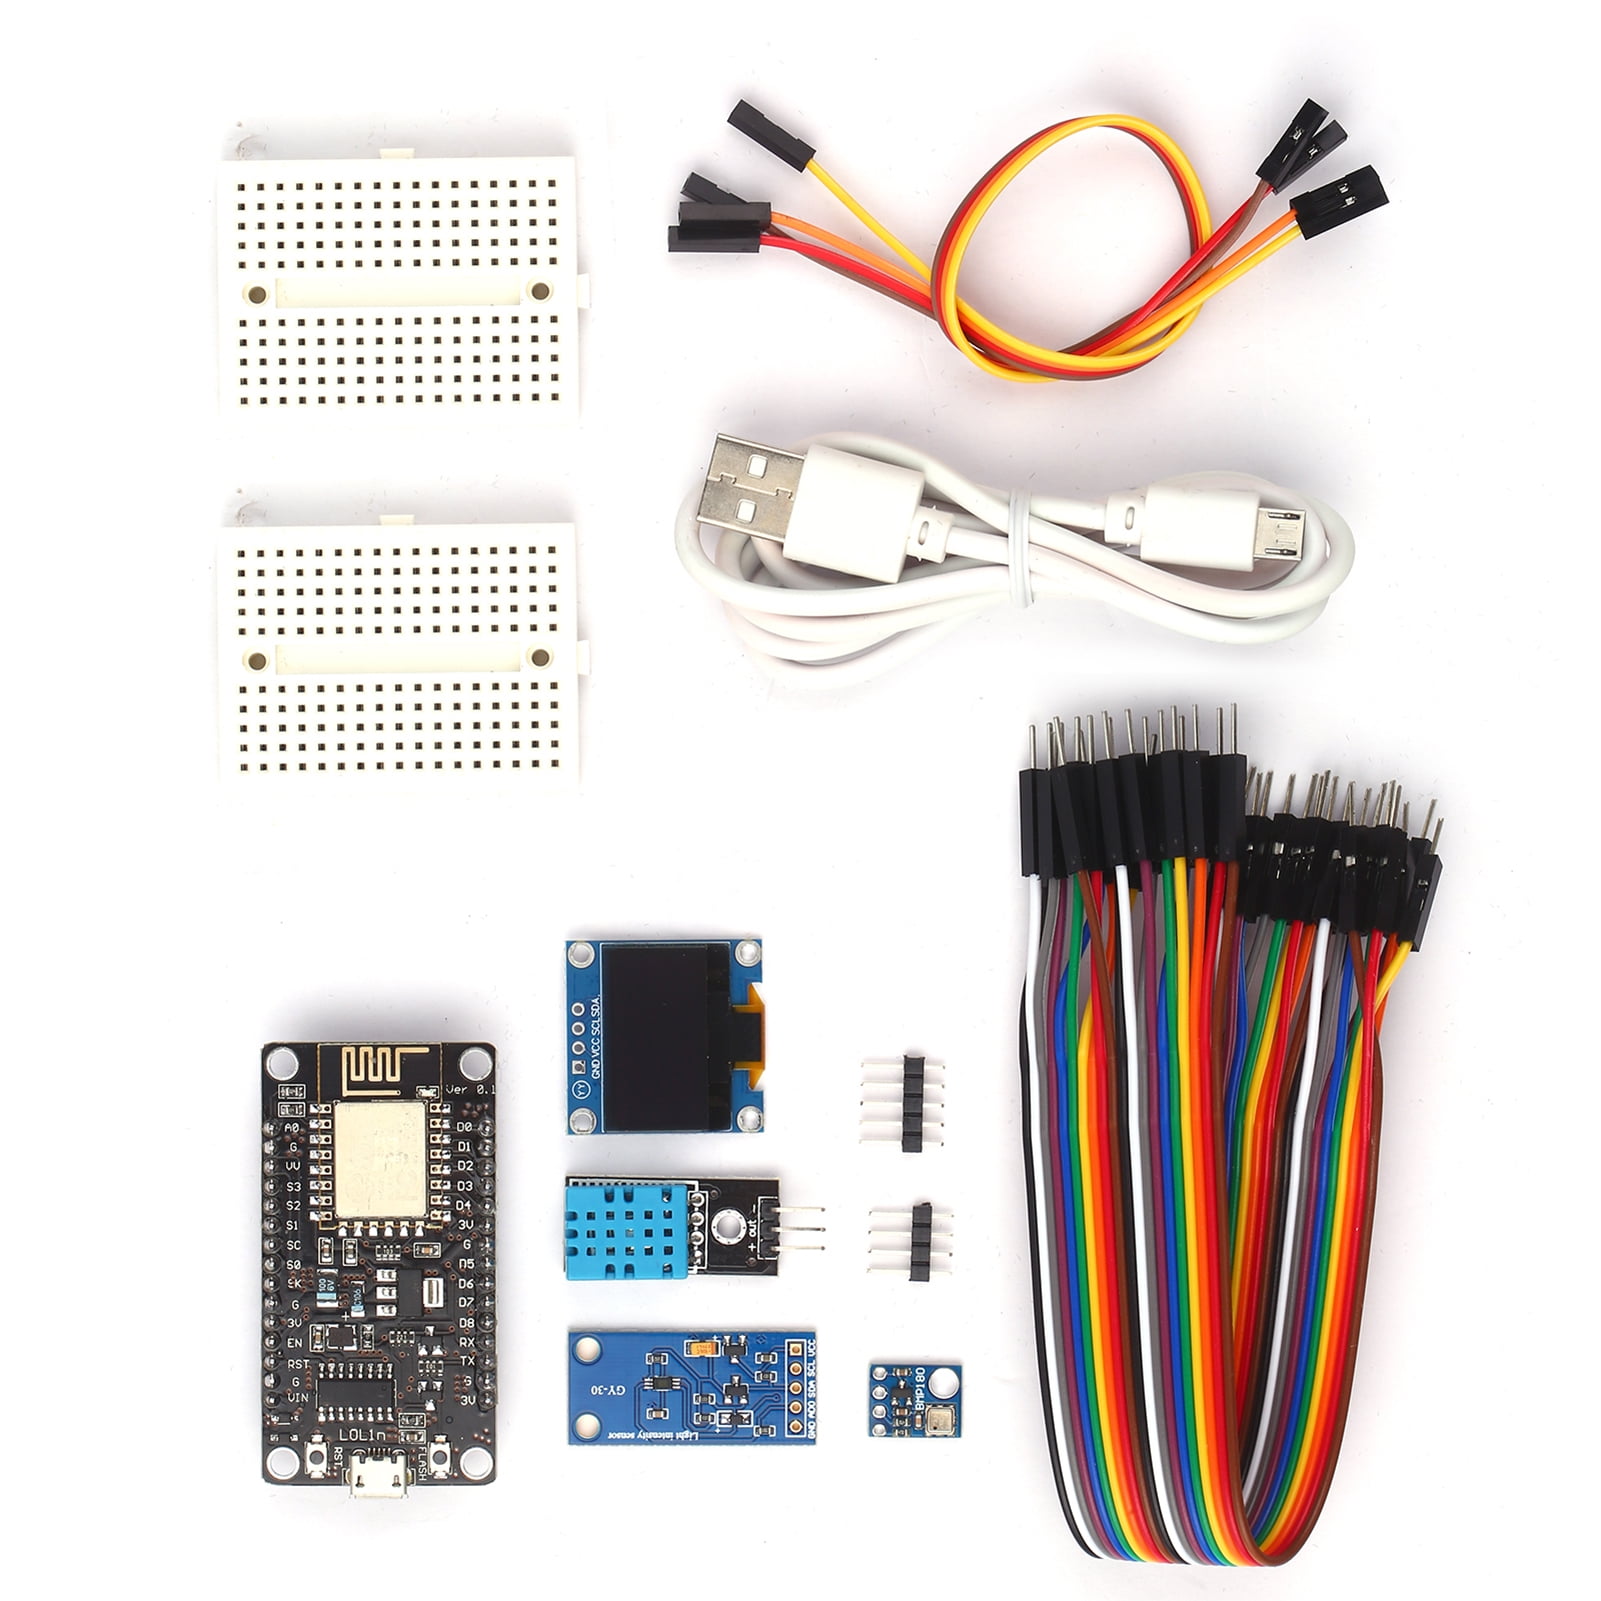 ESP8266 Weather Station Kit with DHT11 Temperature Humidity BMP180 Atmosphetic Pressure BH1750FVI Light Sensor 0.96 OLED IIC YellowBlue Display for Arduino IDE IoT Starter Guidance Document Included